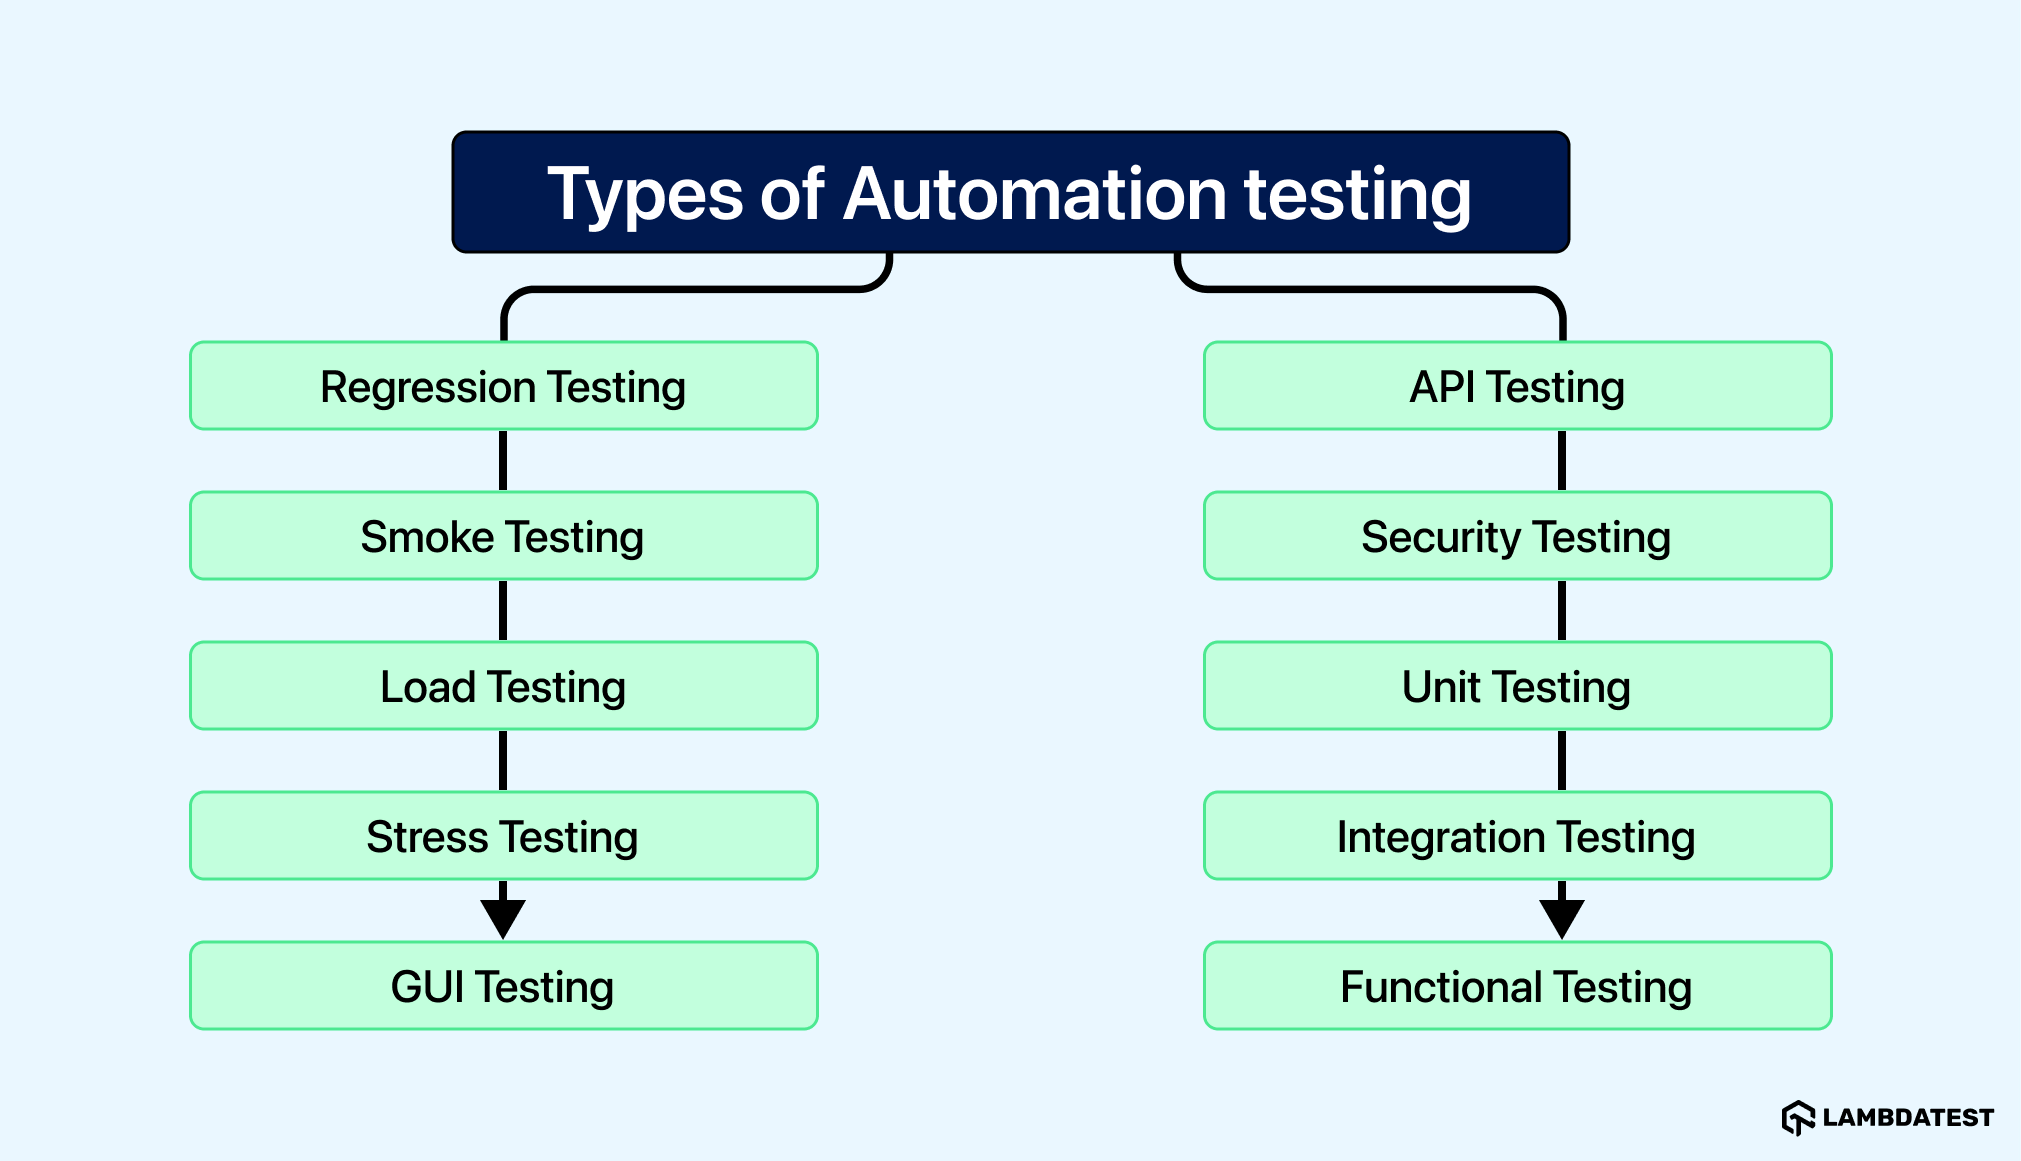 Types of Automation testing